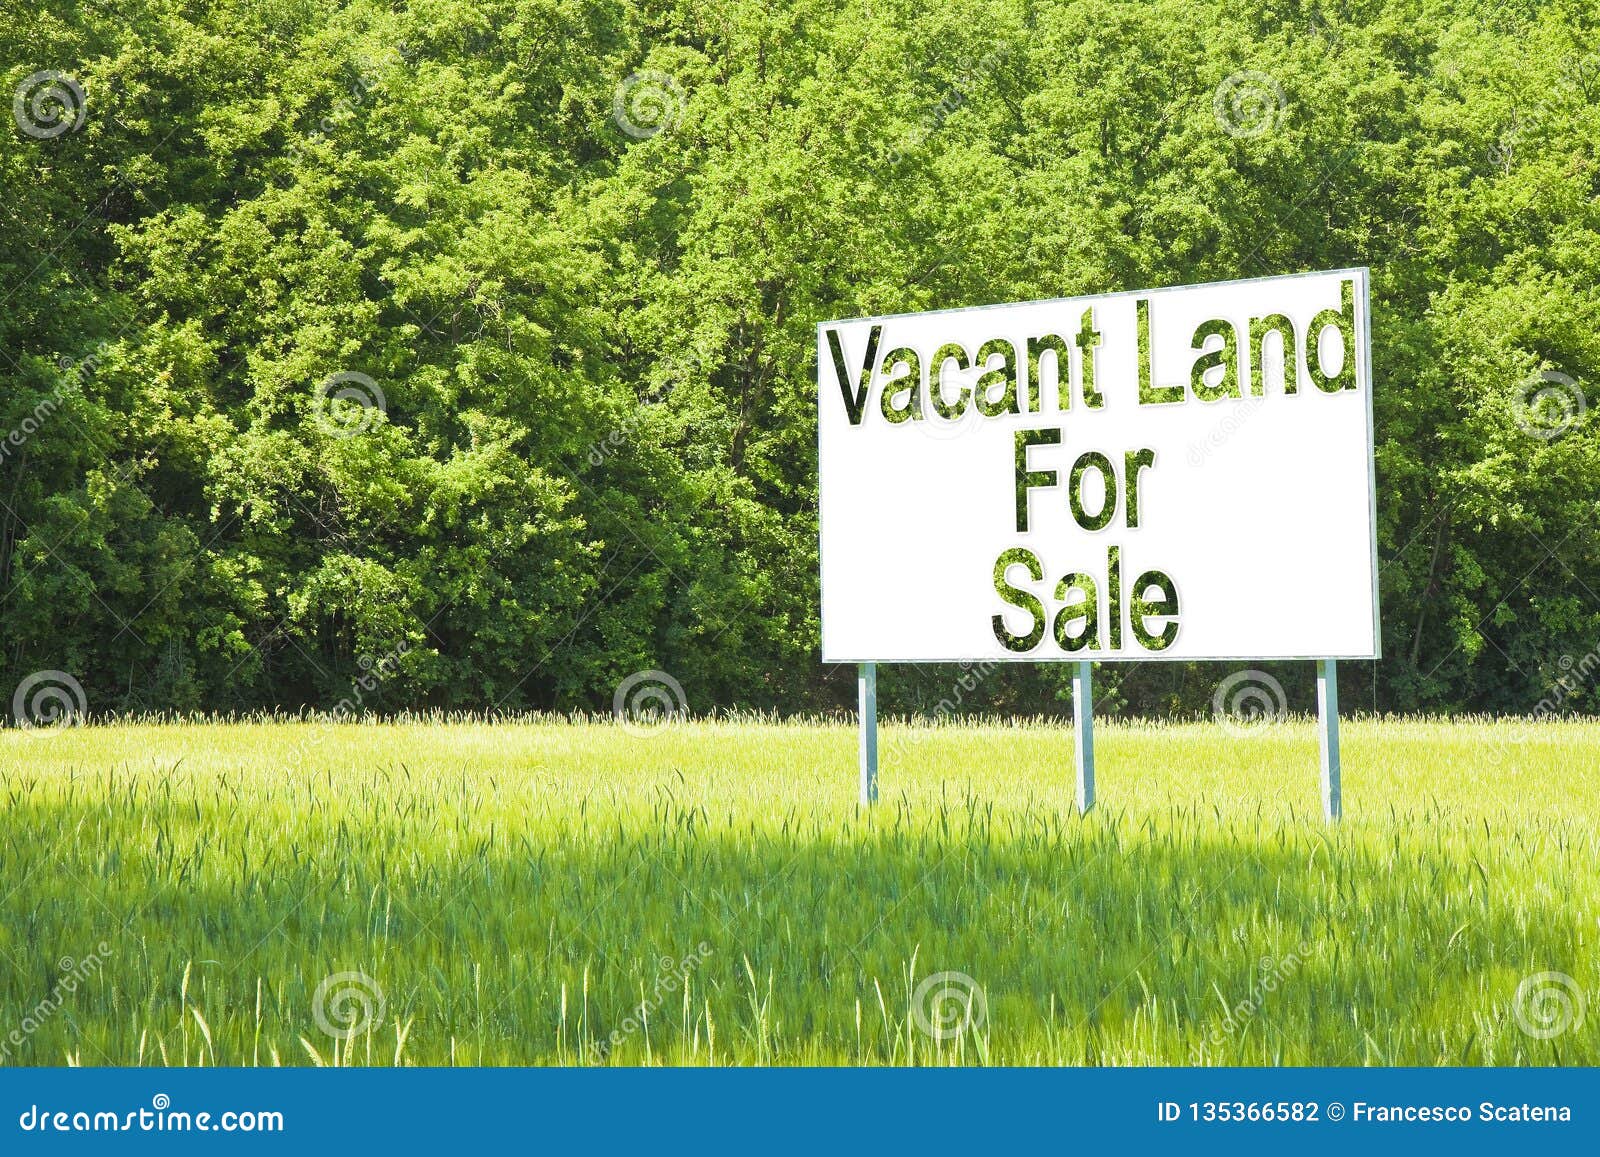 advertising billboard immersed in a rural scene with vacant land for sale written on it - image with copy space